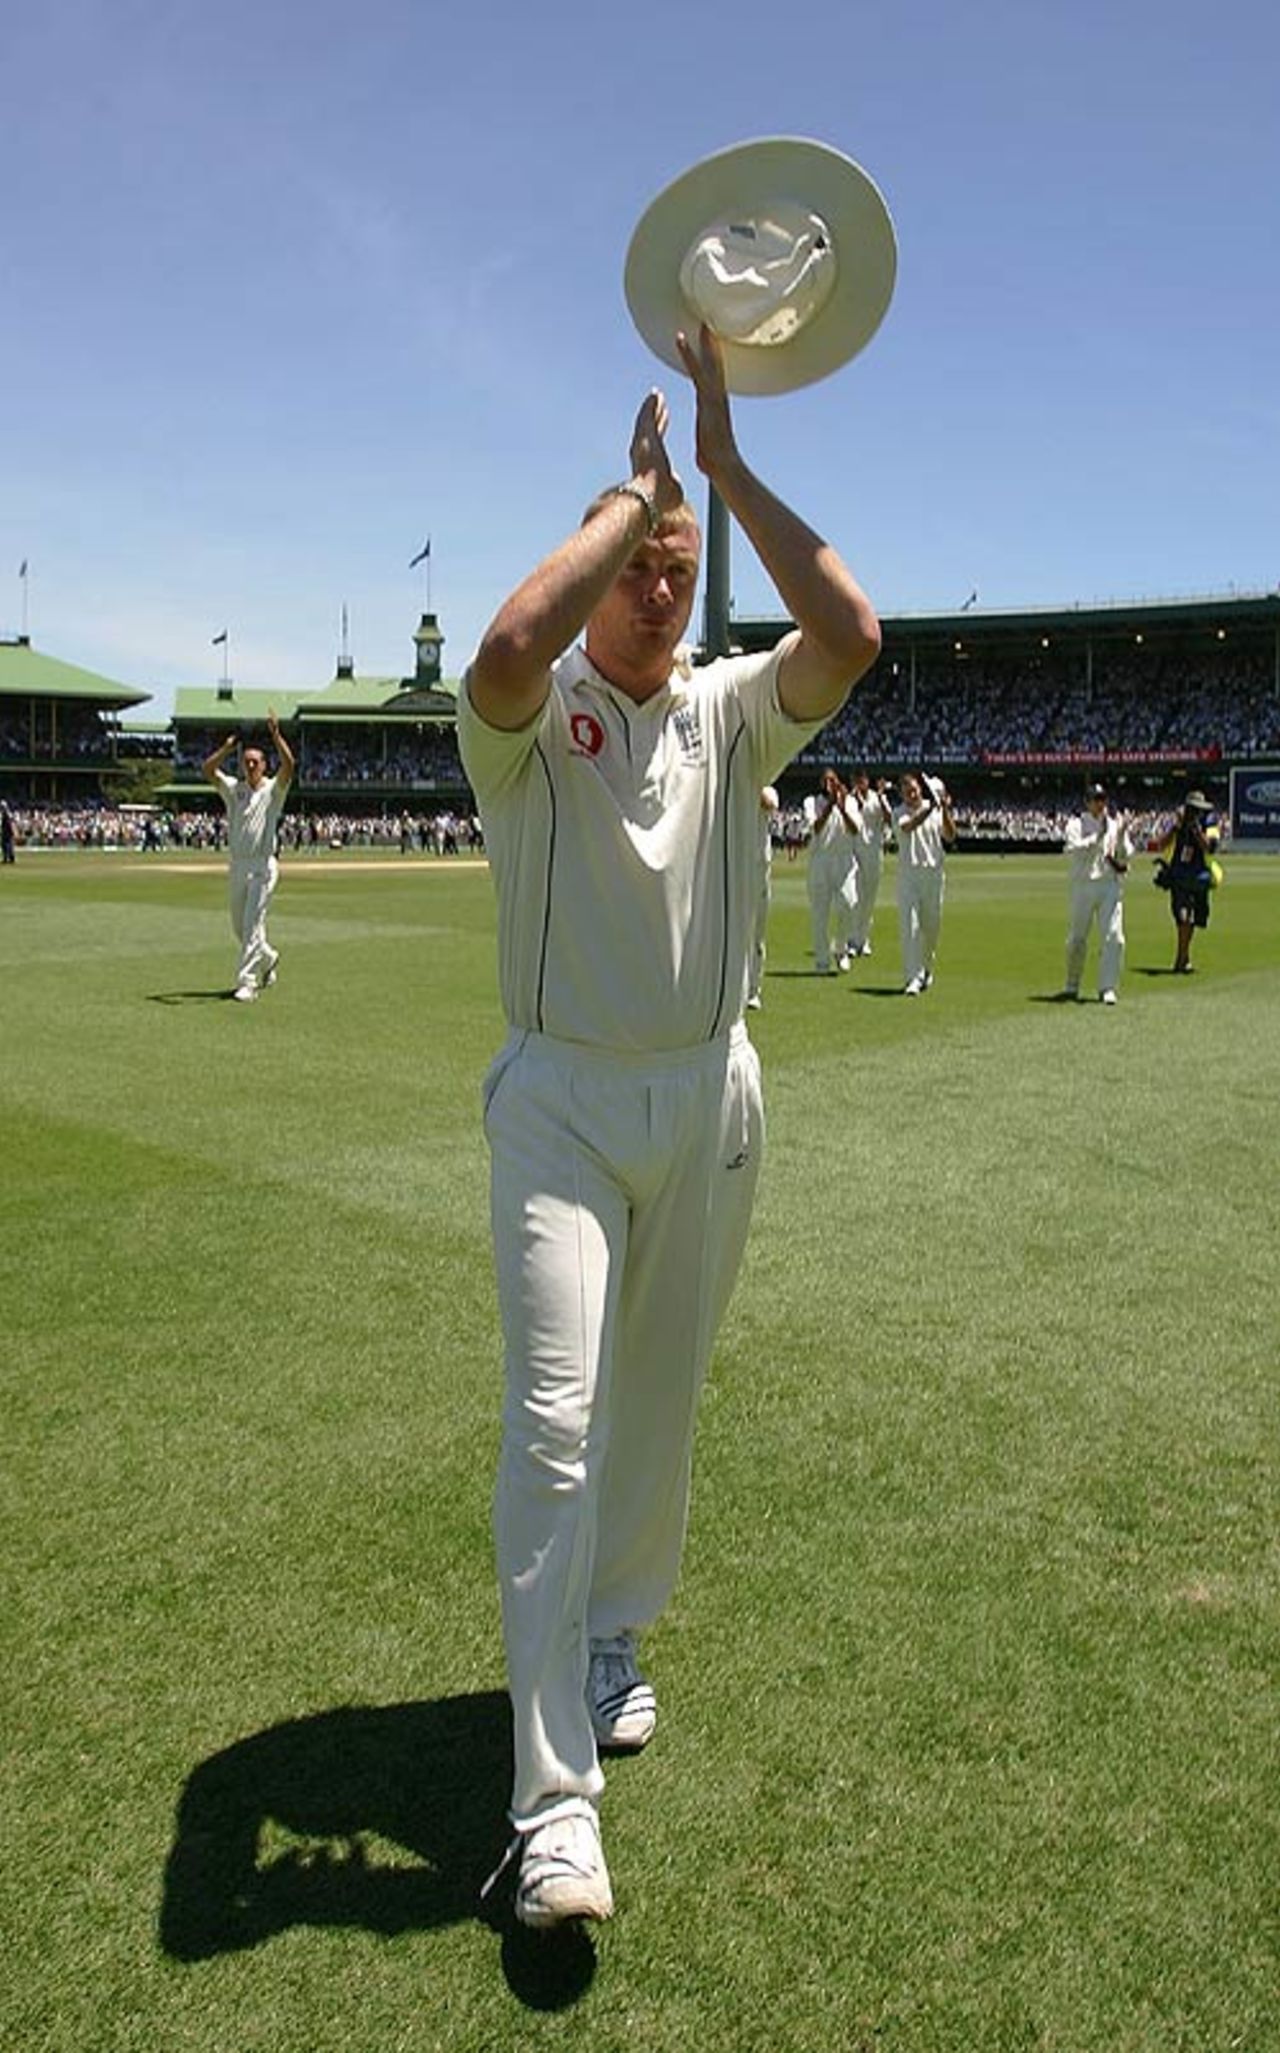 Andrew Flintoff salutes the crowd after leading England to a 5-0 Ashes series loss, Australia v England, 5th Test, Sydney, January 5, 2007